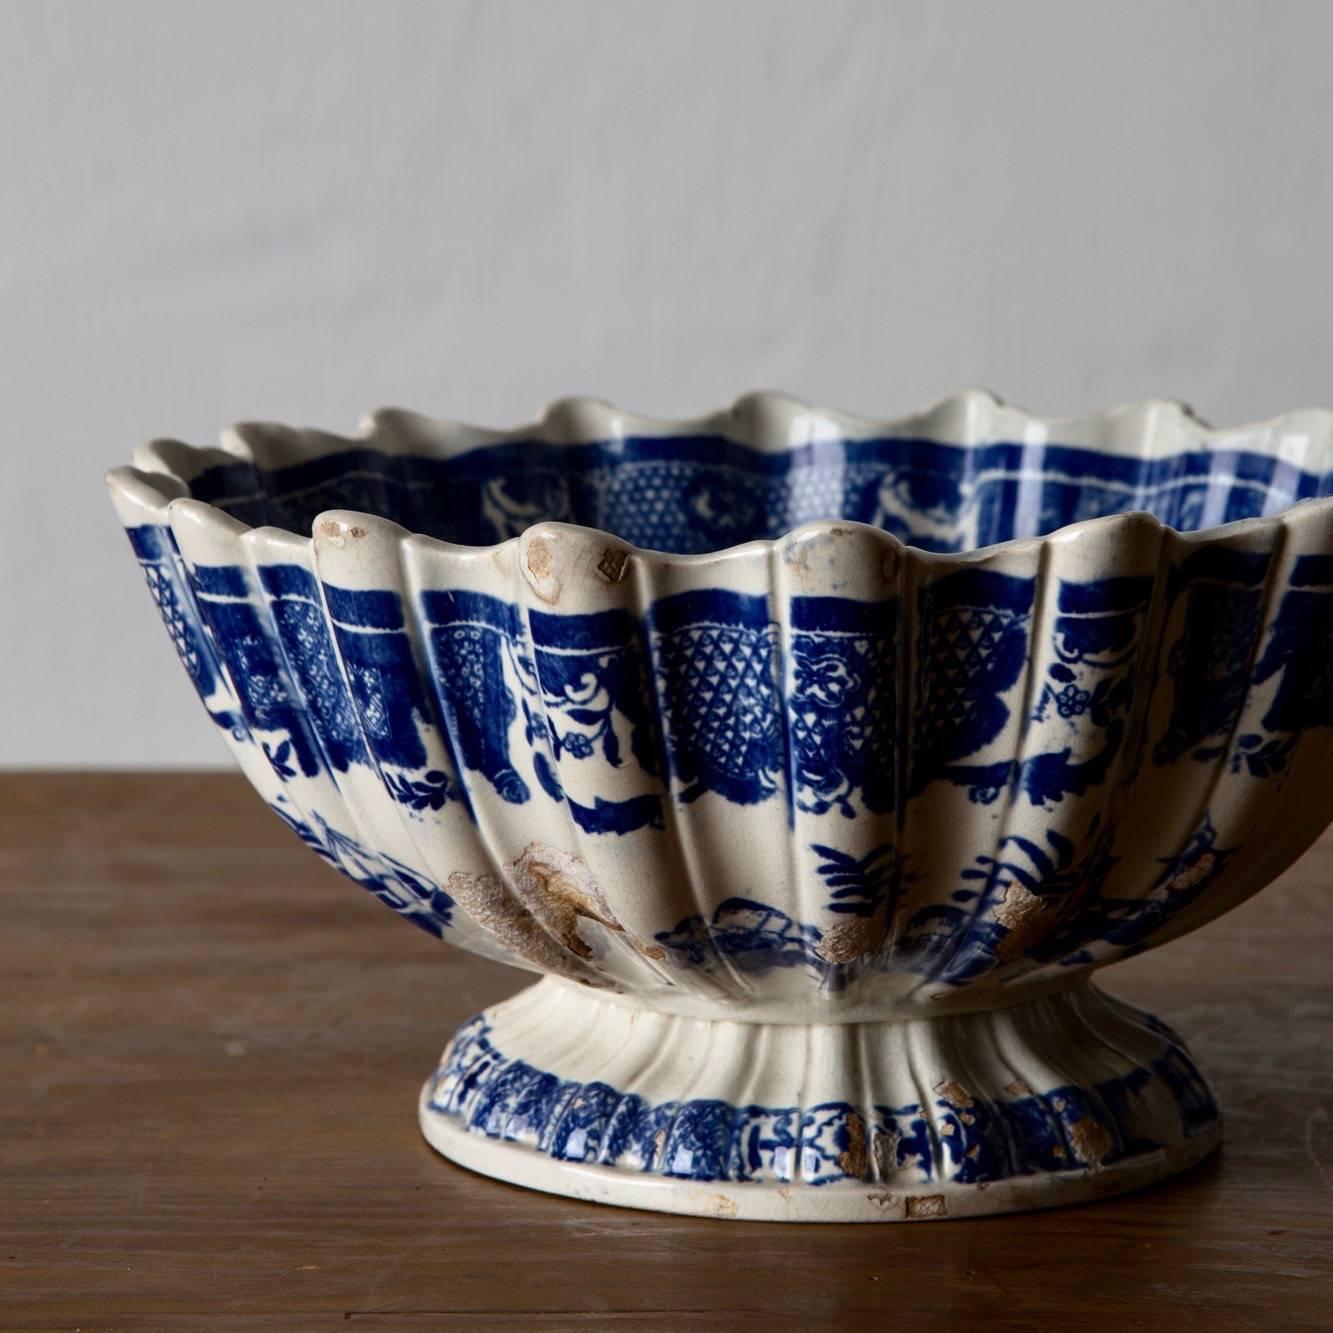 An assembled pair of bowls Swedish Rörstrand porcelain 19th century blue and white, Sweden. Blue pattern a la chinoiserie on a white background.